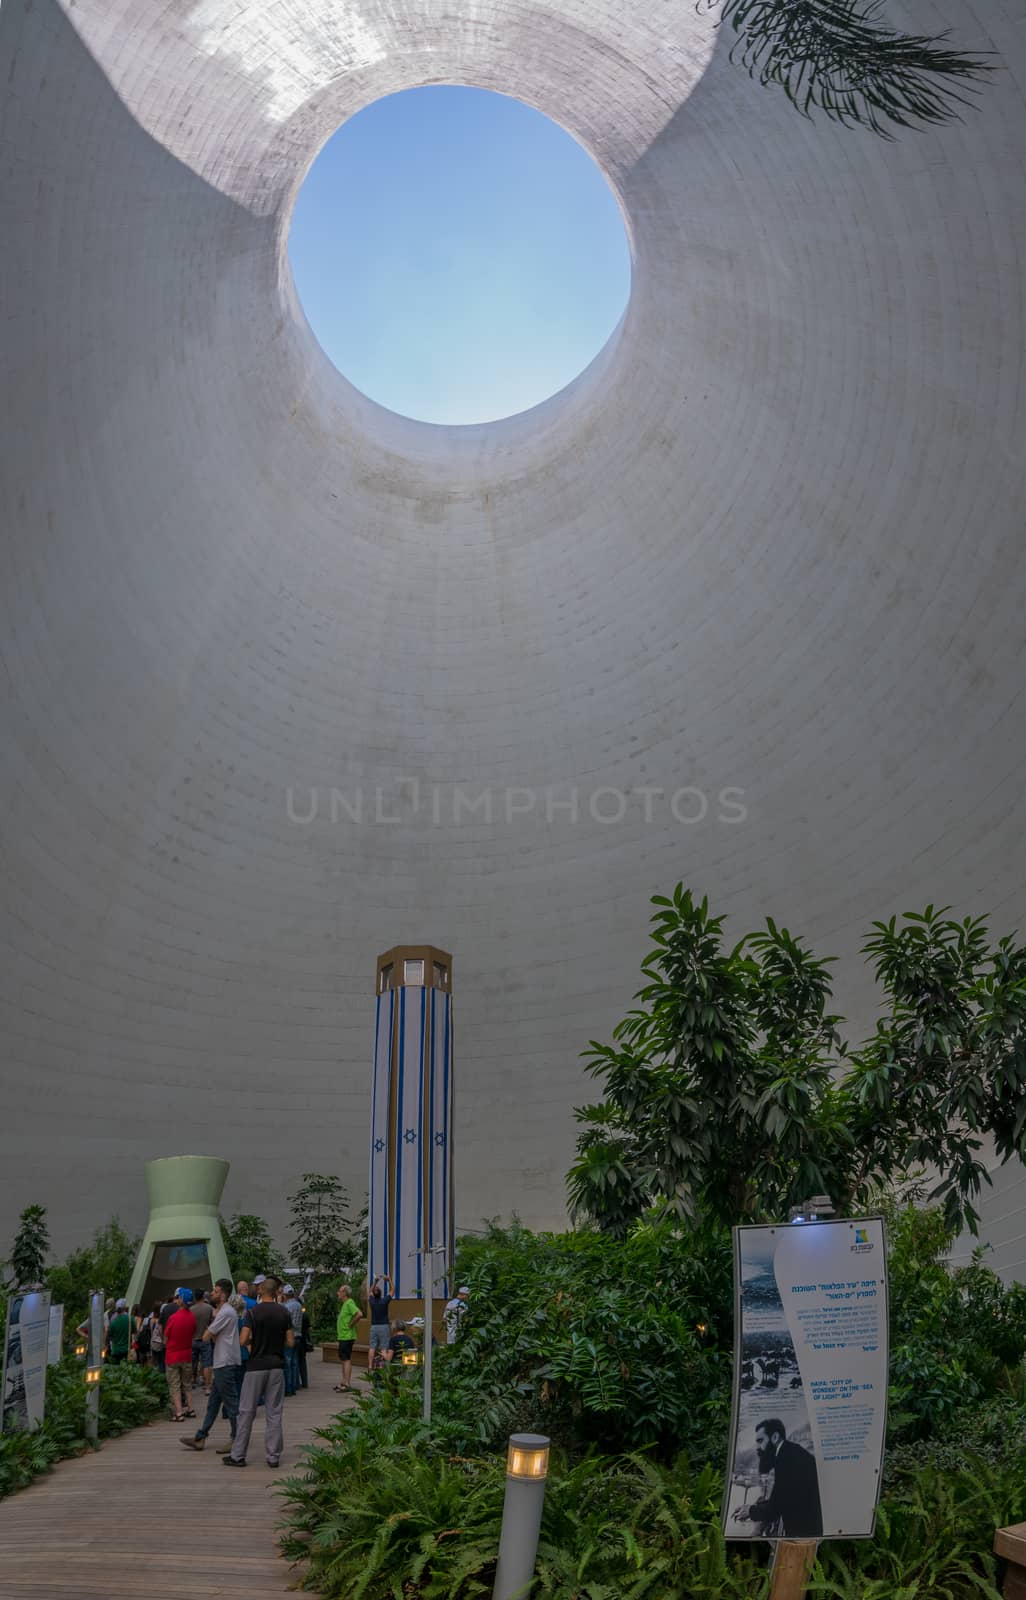 HAIFA, ISRAEL - JULY 20, 2018: Interior view of a Cooling tower in Haifa Oil Refinery compound, now a visitor center, with visitors, in Haifa, Israel